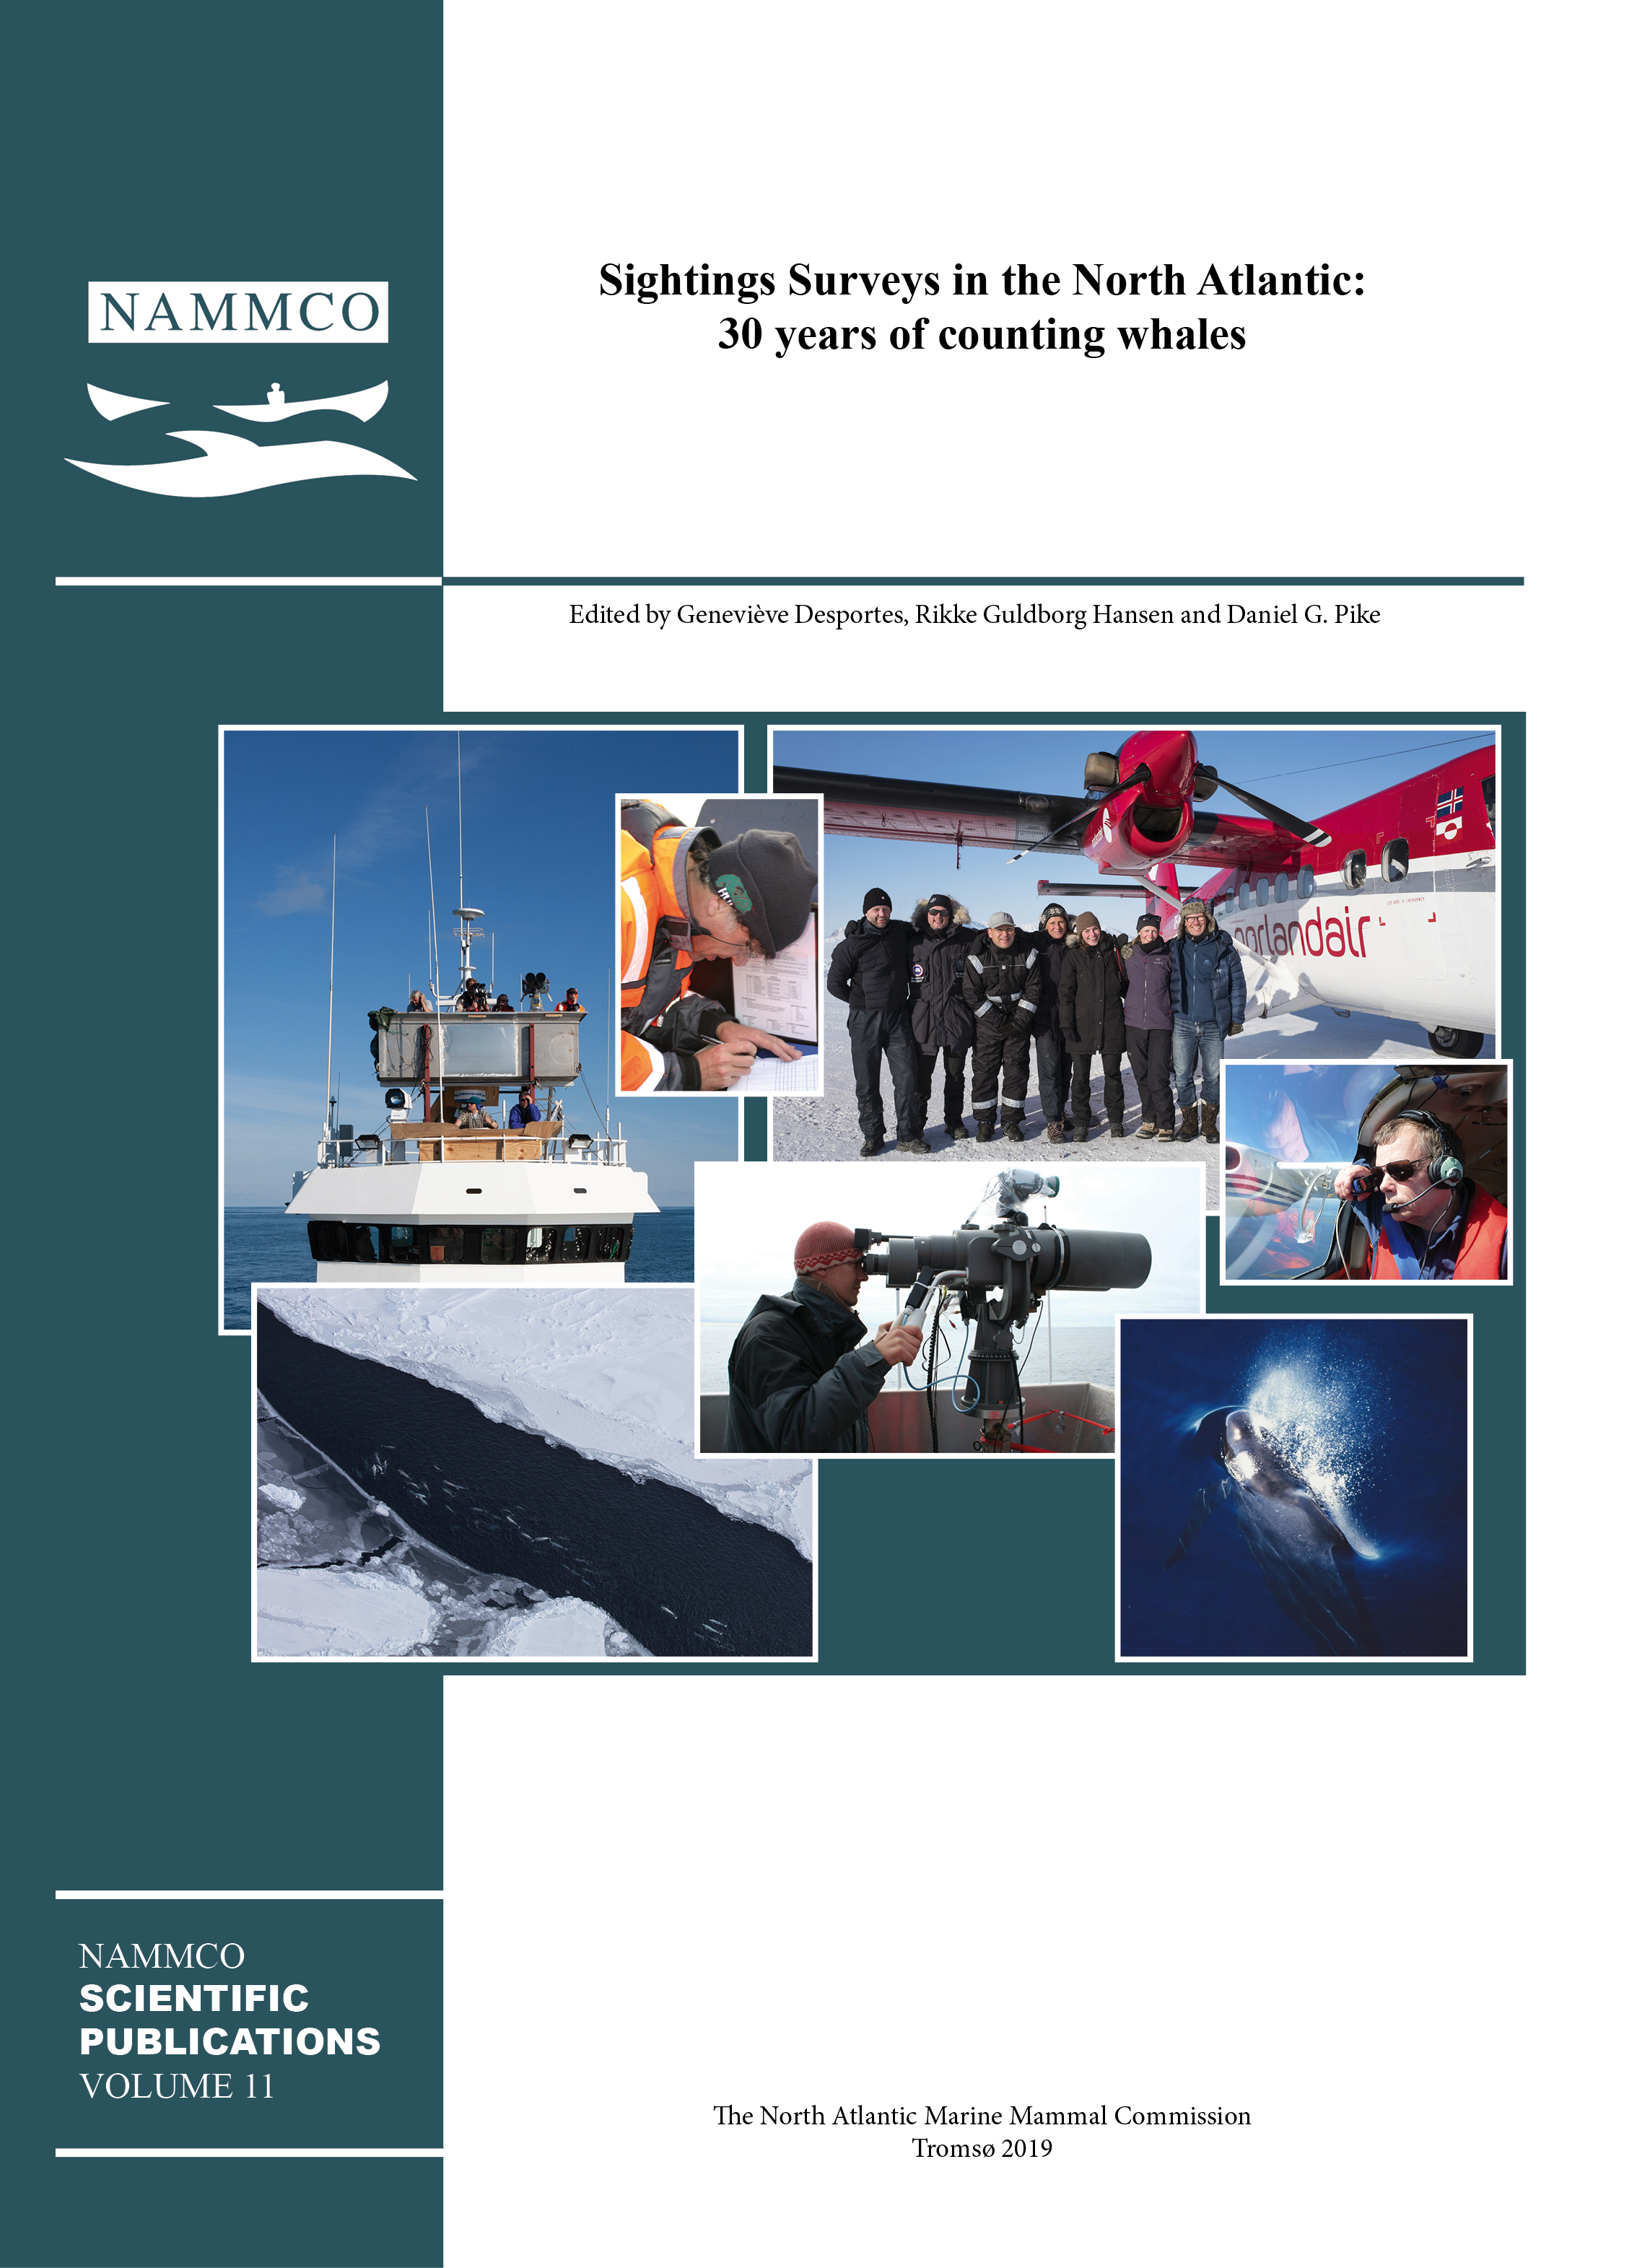 					View Vol. 11 (2019): Sightings Surveys in the North Atlantic: 30 years of counting whales
				